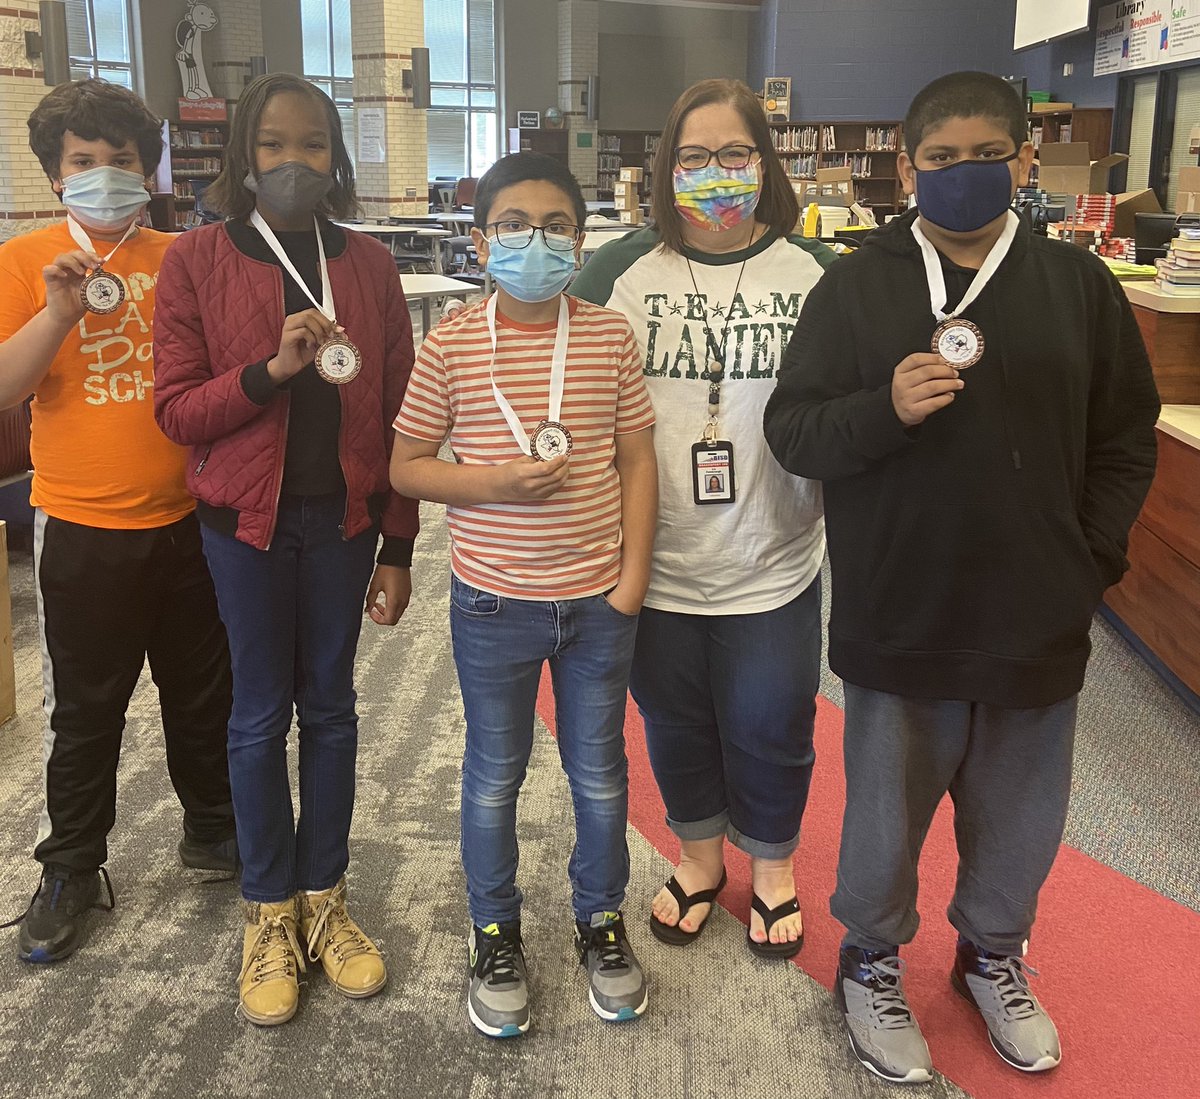 These Lanier Lion Readers earned 3rd place in the Name that Book Competition! #BISDPride